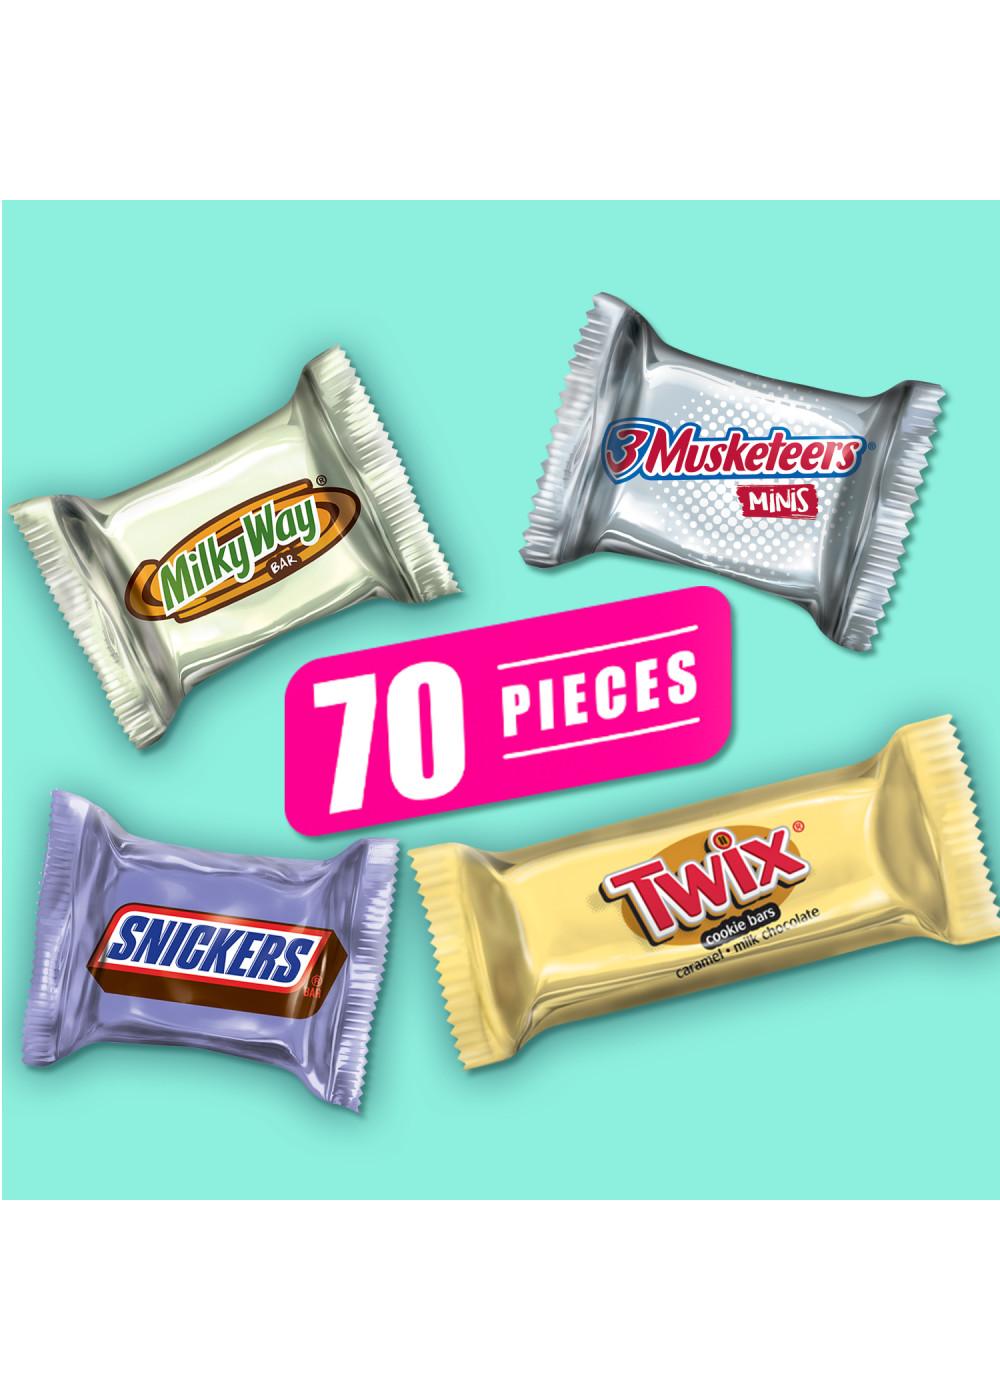 Easter Musketeers Assorted Snickers, H-E-B Milky & at Twix, Candy 3 Way, Shop Candy -